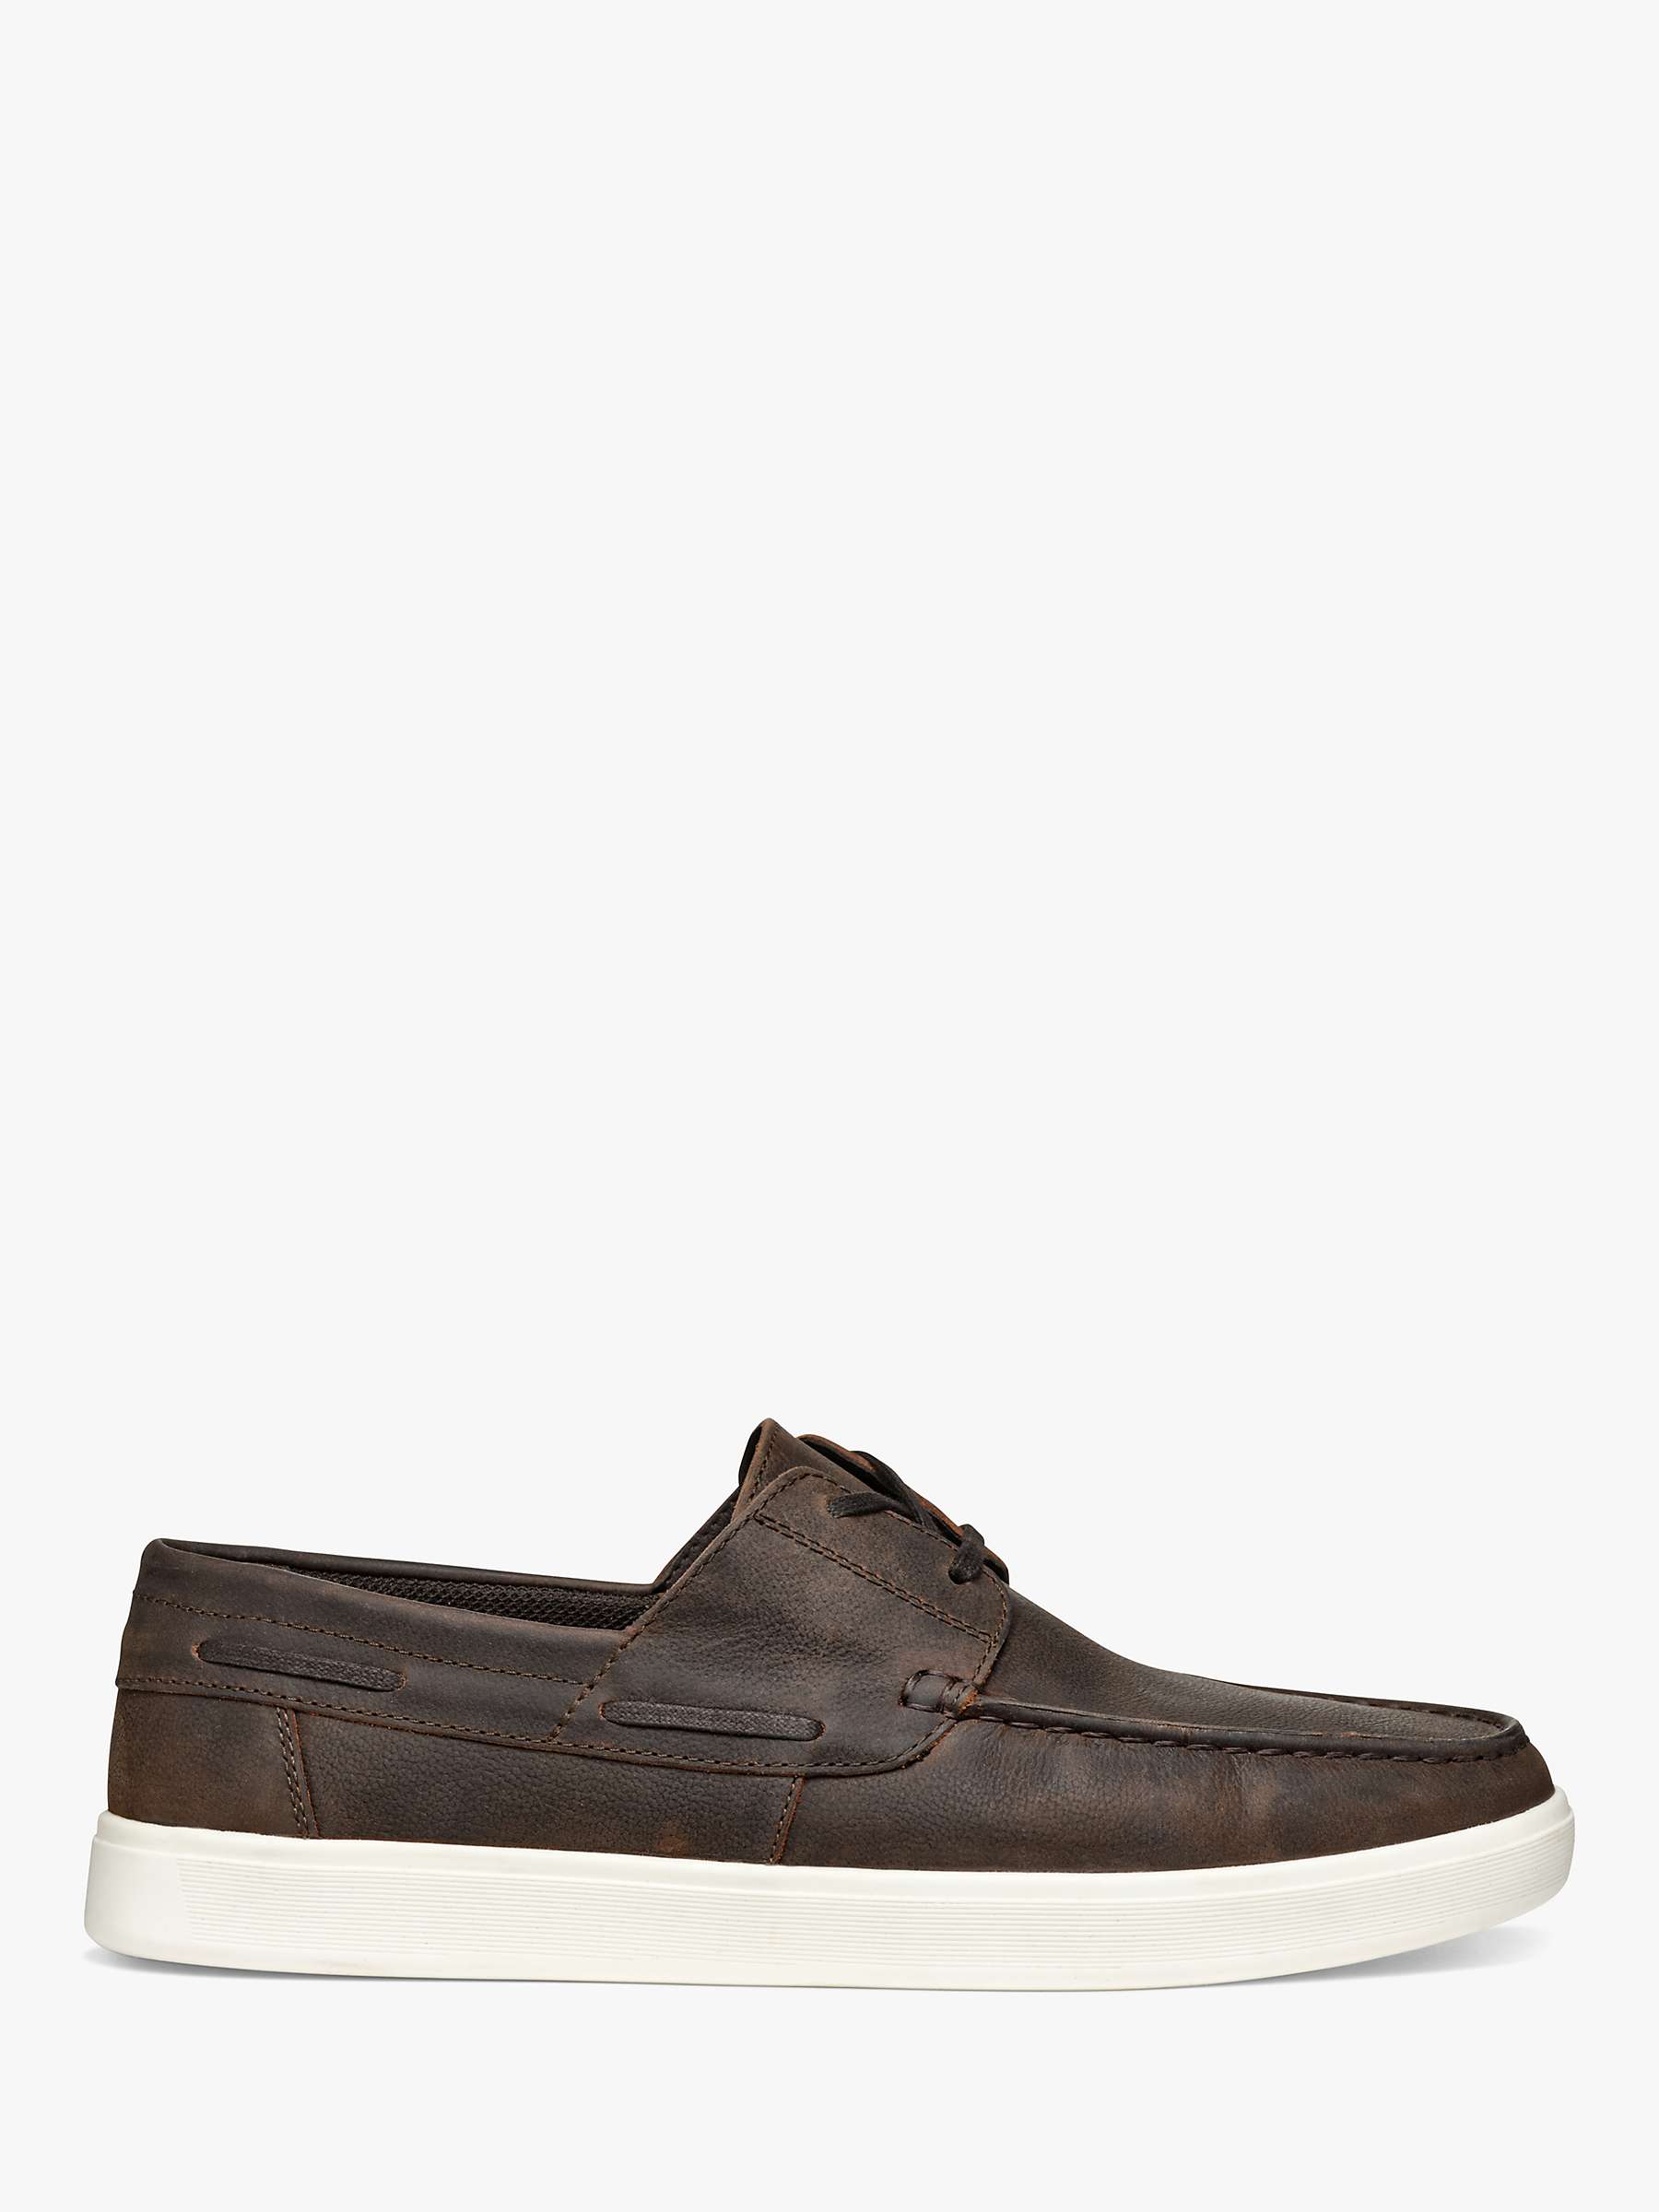 Buy Geox Avola Leather Loafers, Light Brown Online at johnlewis.com